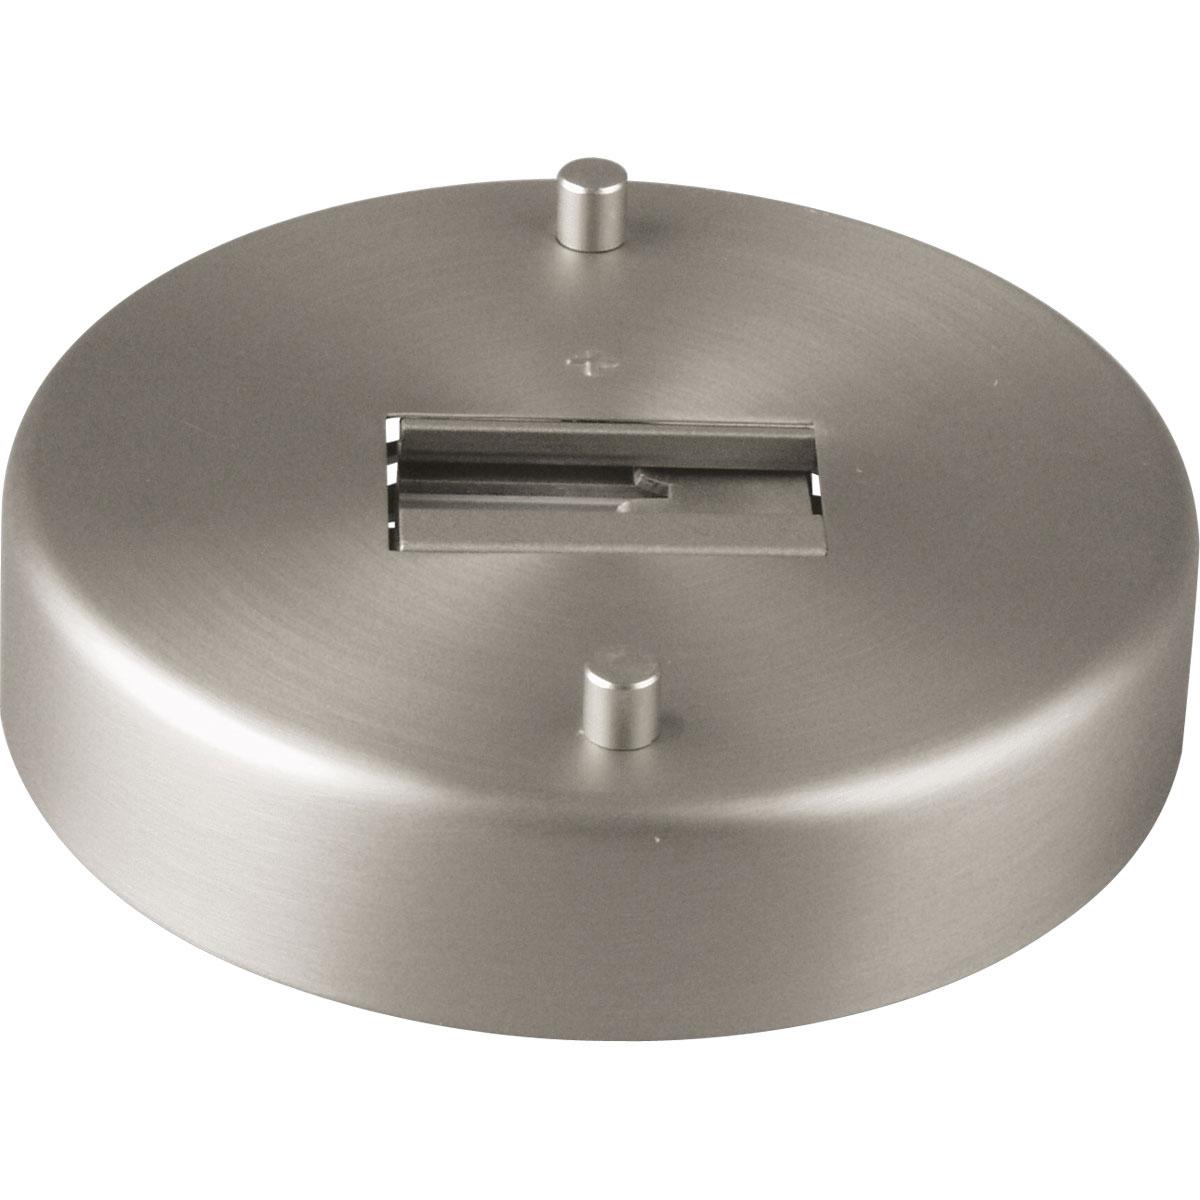 Hubbell P8734-09 Monopoint. Mounts any lampholder, not requiring an external transformer, to junction box on ceiling or wall. Brushed Nickel finish.  ; Brushed Nickel finish. ; Does not require an external transformer. ; Mounts any lampholder to junction box on ceiling or